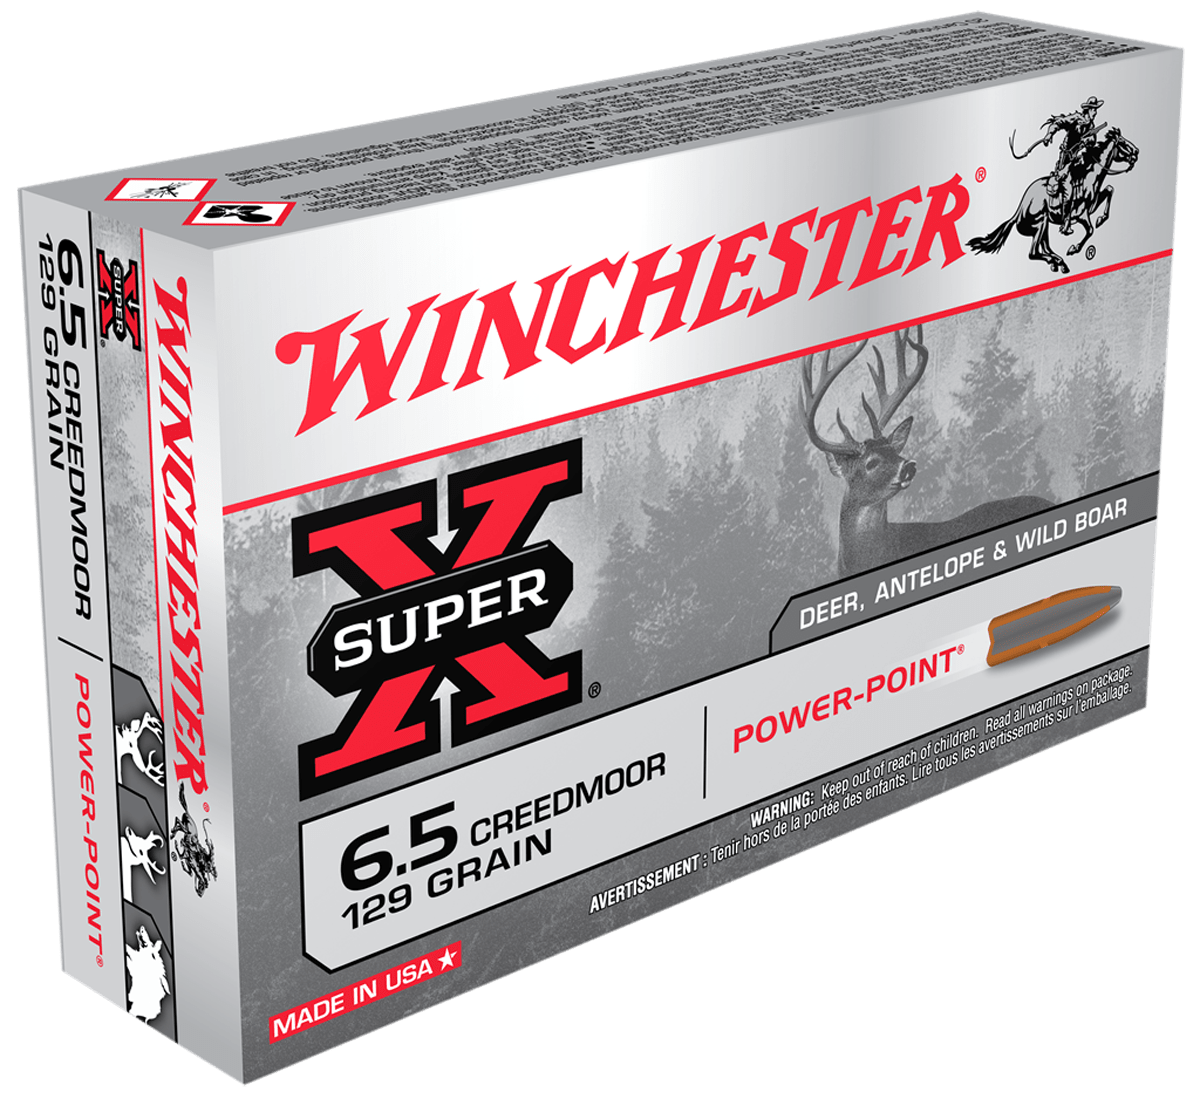 Winchester Ammo Winchester Super-x Rifle Ammo 6.5 Creedmoor 129 Gr. Power-point 20 Rd. Ammo